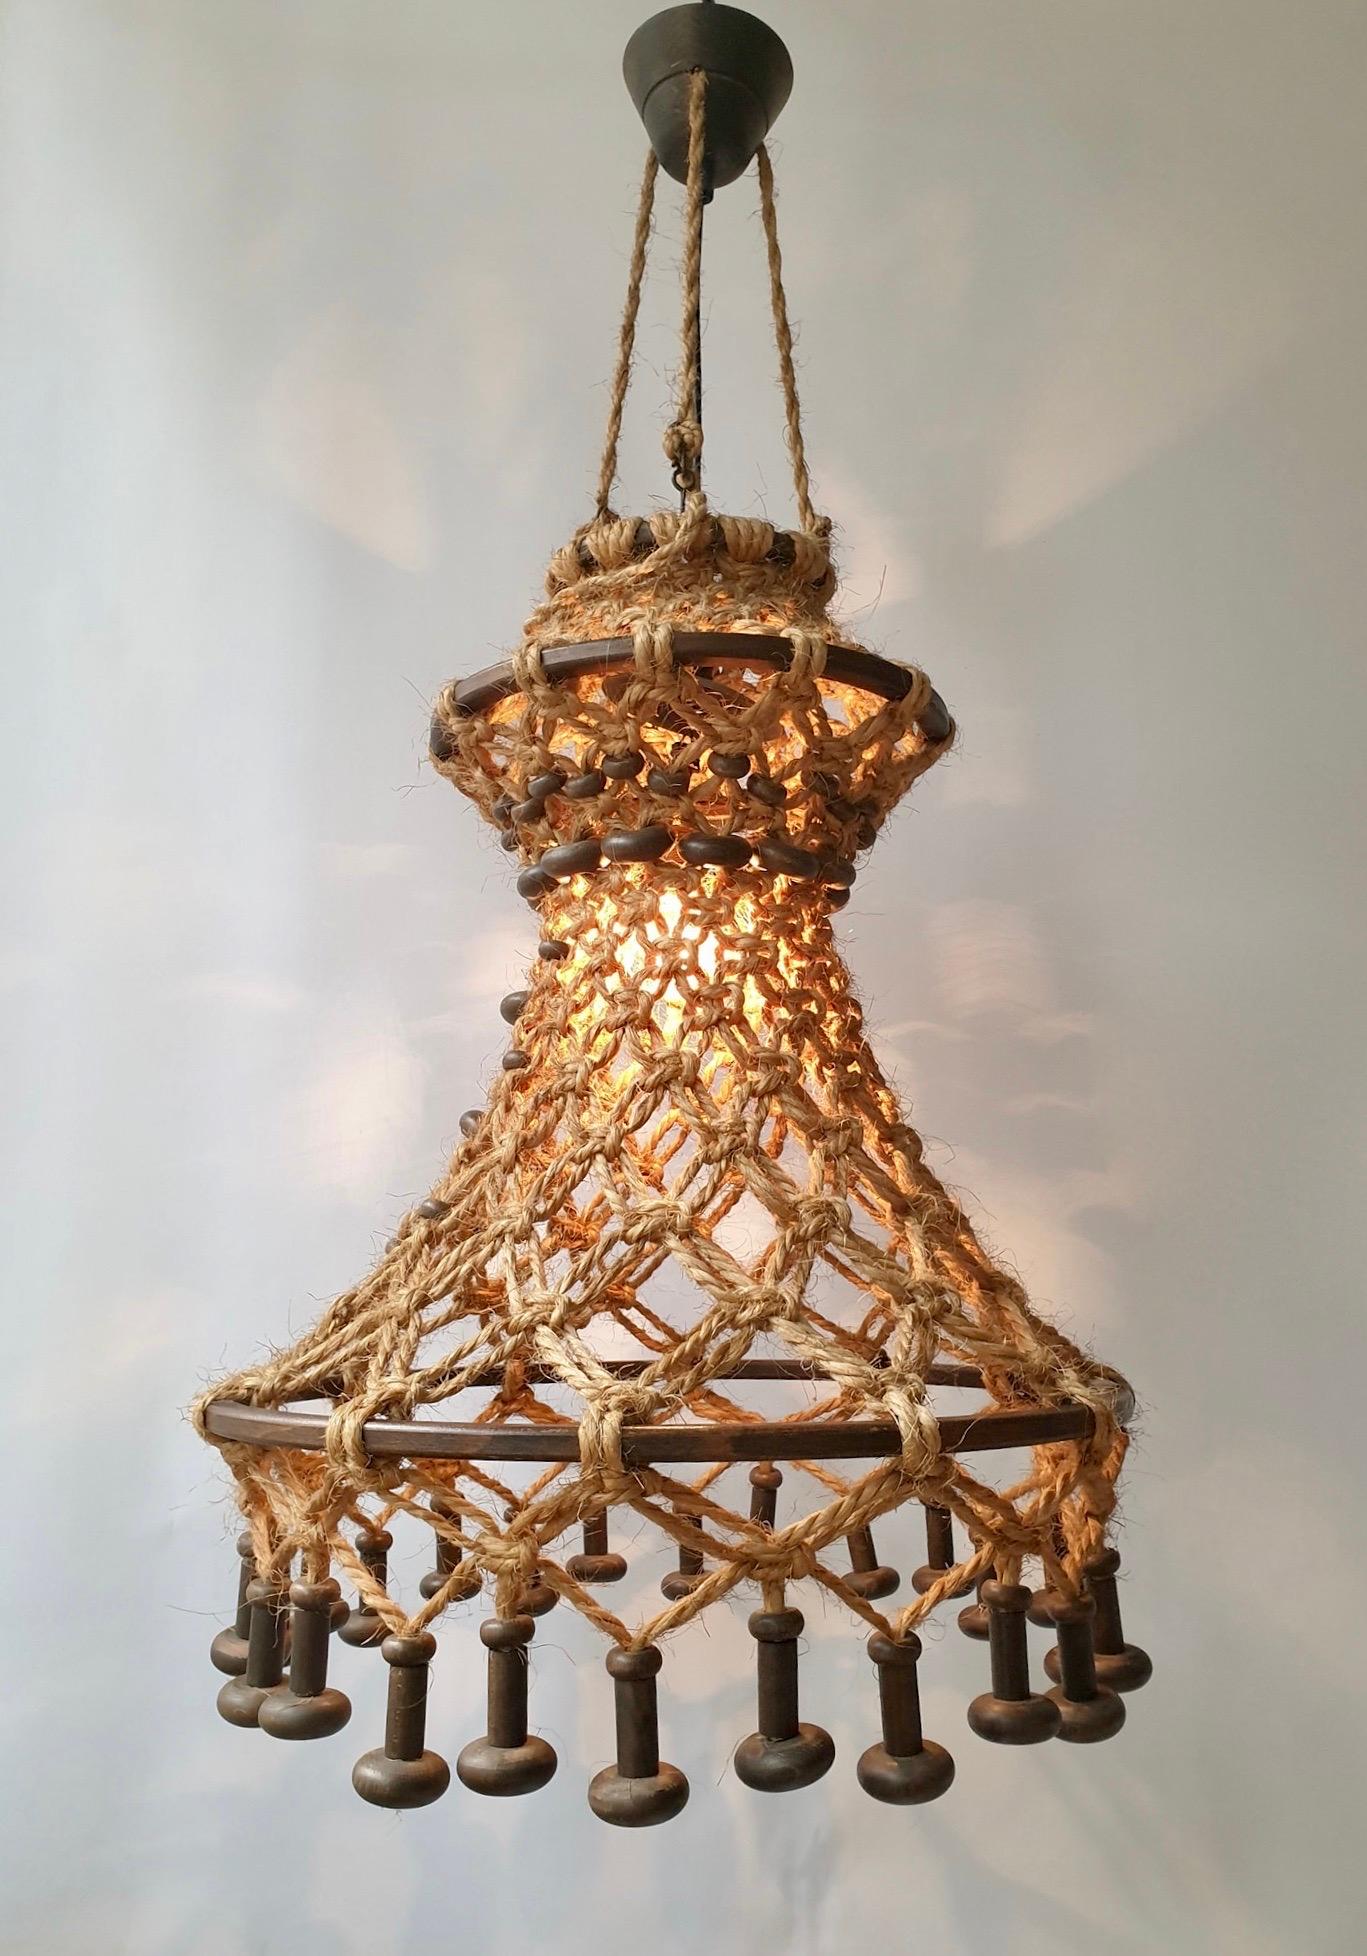 Hand knotted chandelier with natural rope and wood. This pendant light has a very natural, and organic look and feel.
This chandelier comes with a E27 fitting. Max 100W. 

Dimensions:
The rope has an extra length of 160 cm and the total height